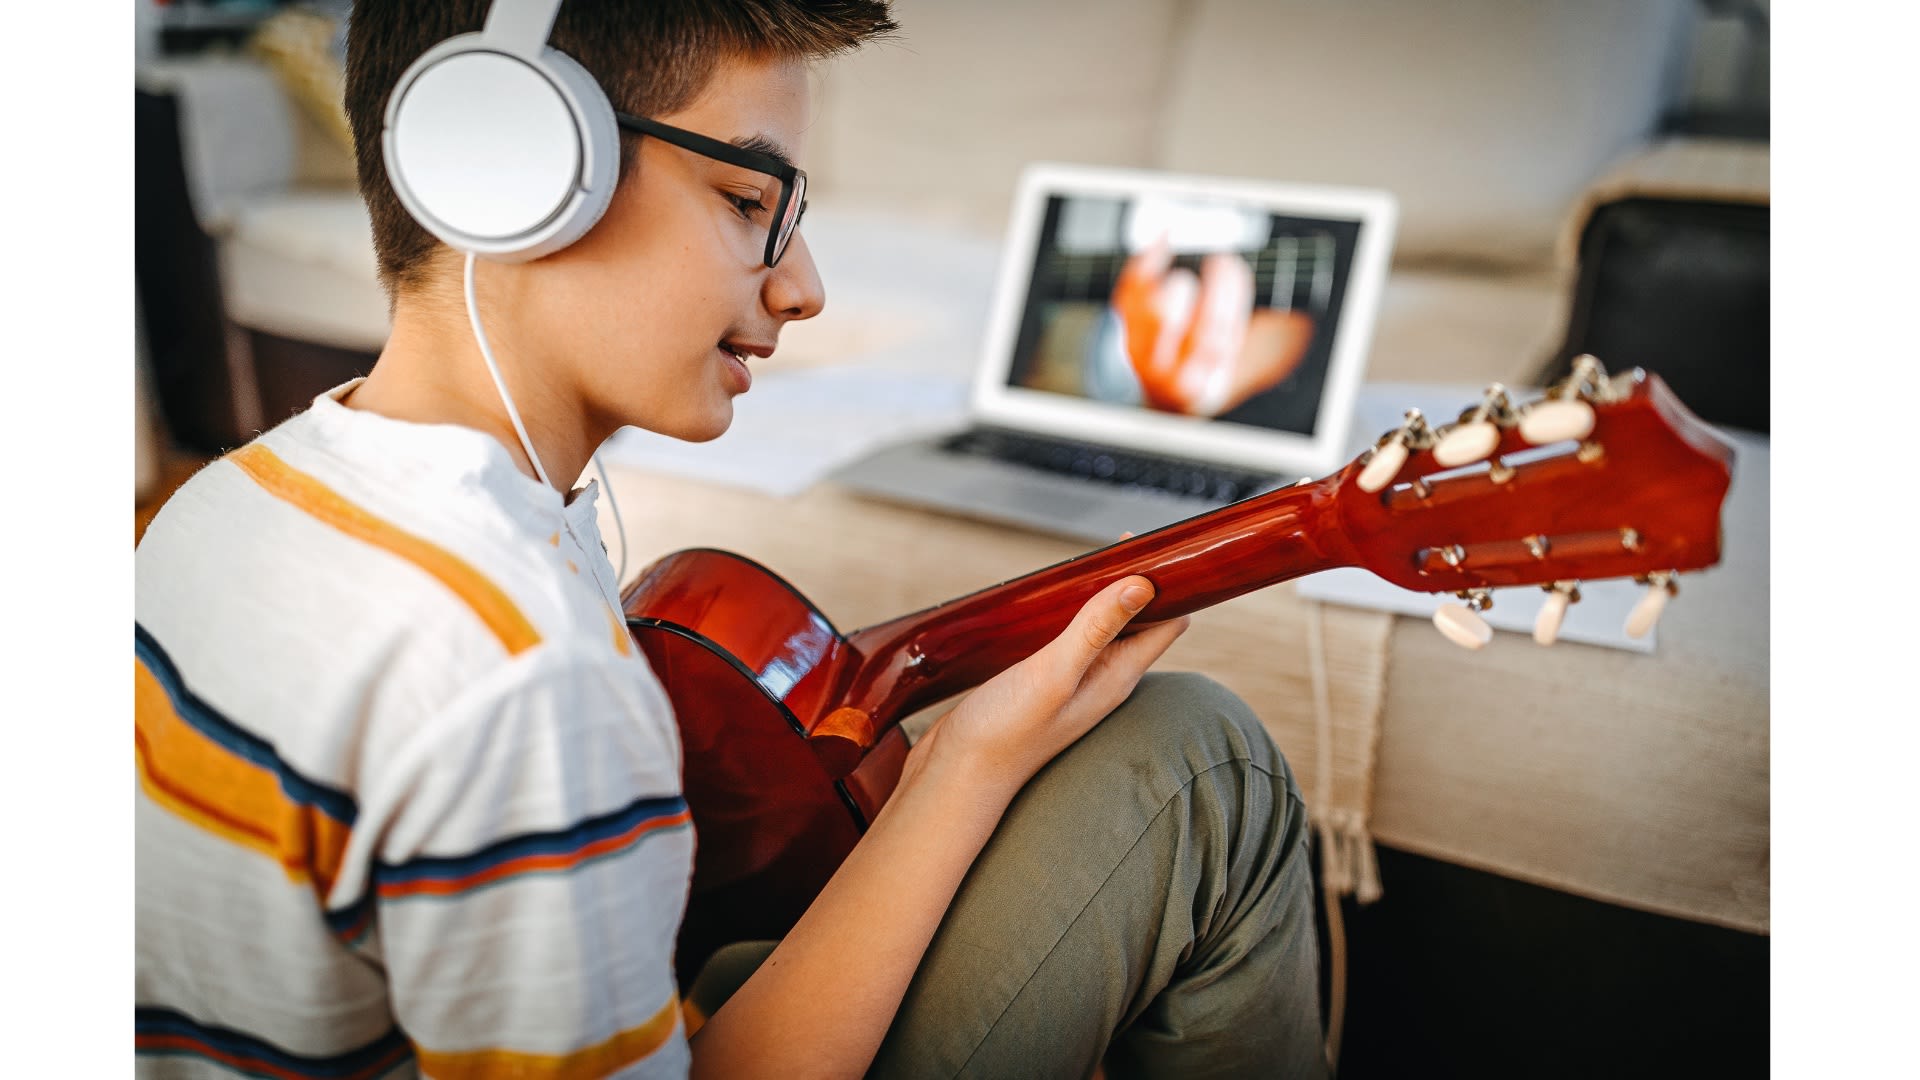 A young teenager in a striped shirt plays guitar while listening to headphones.